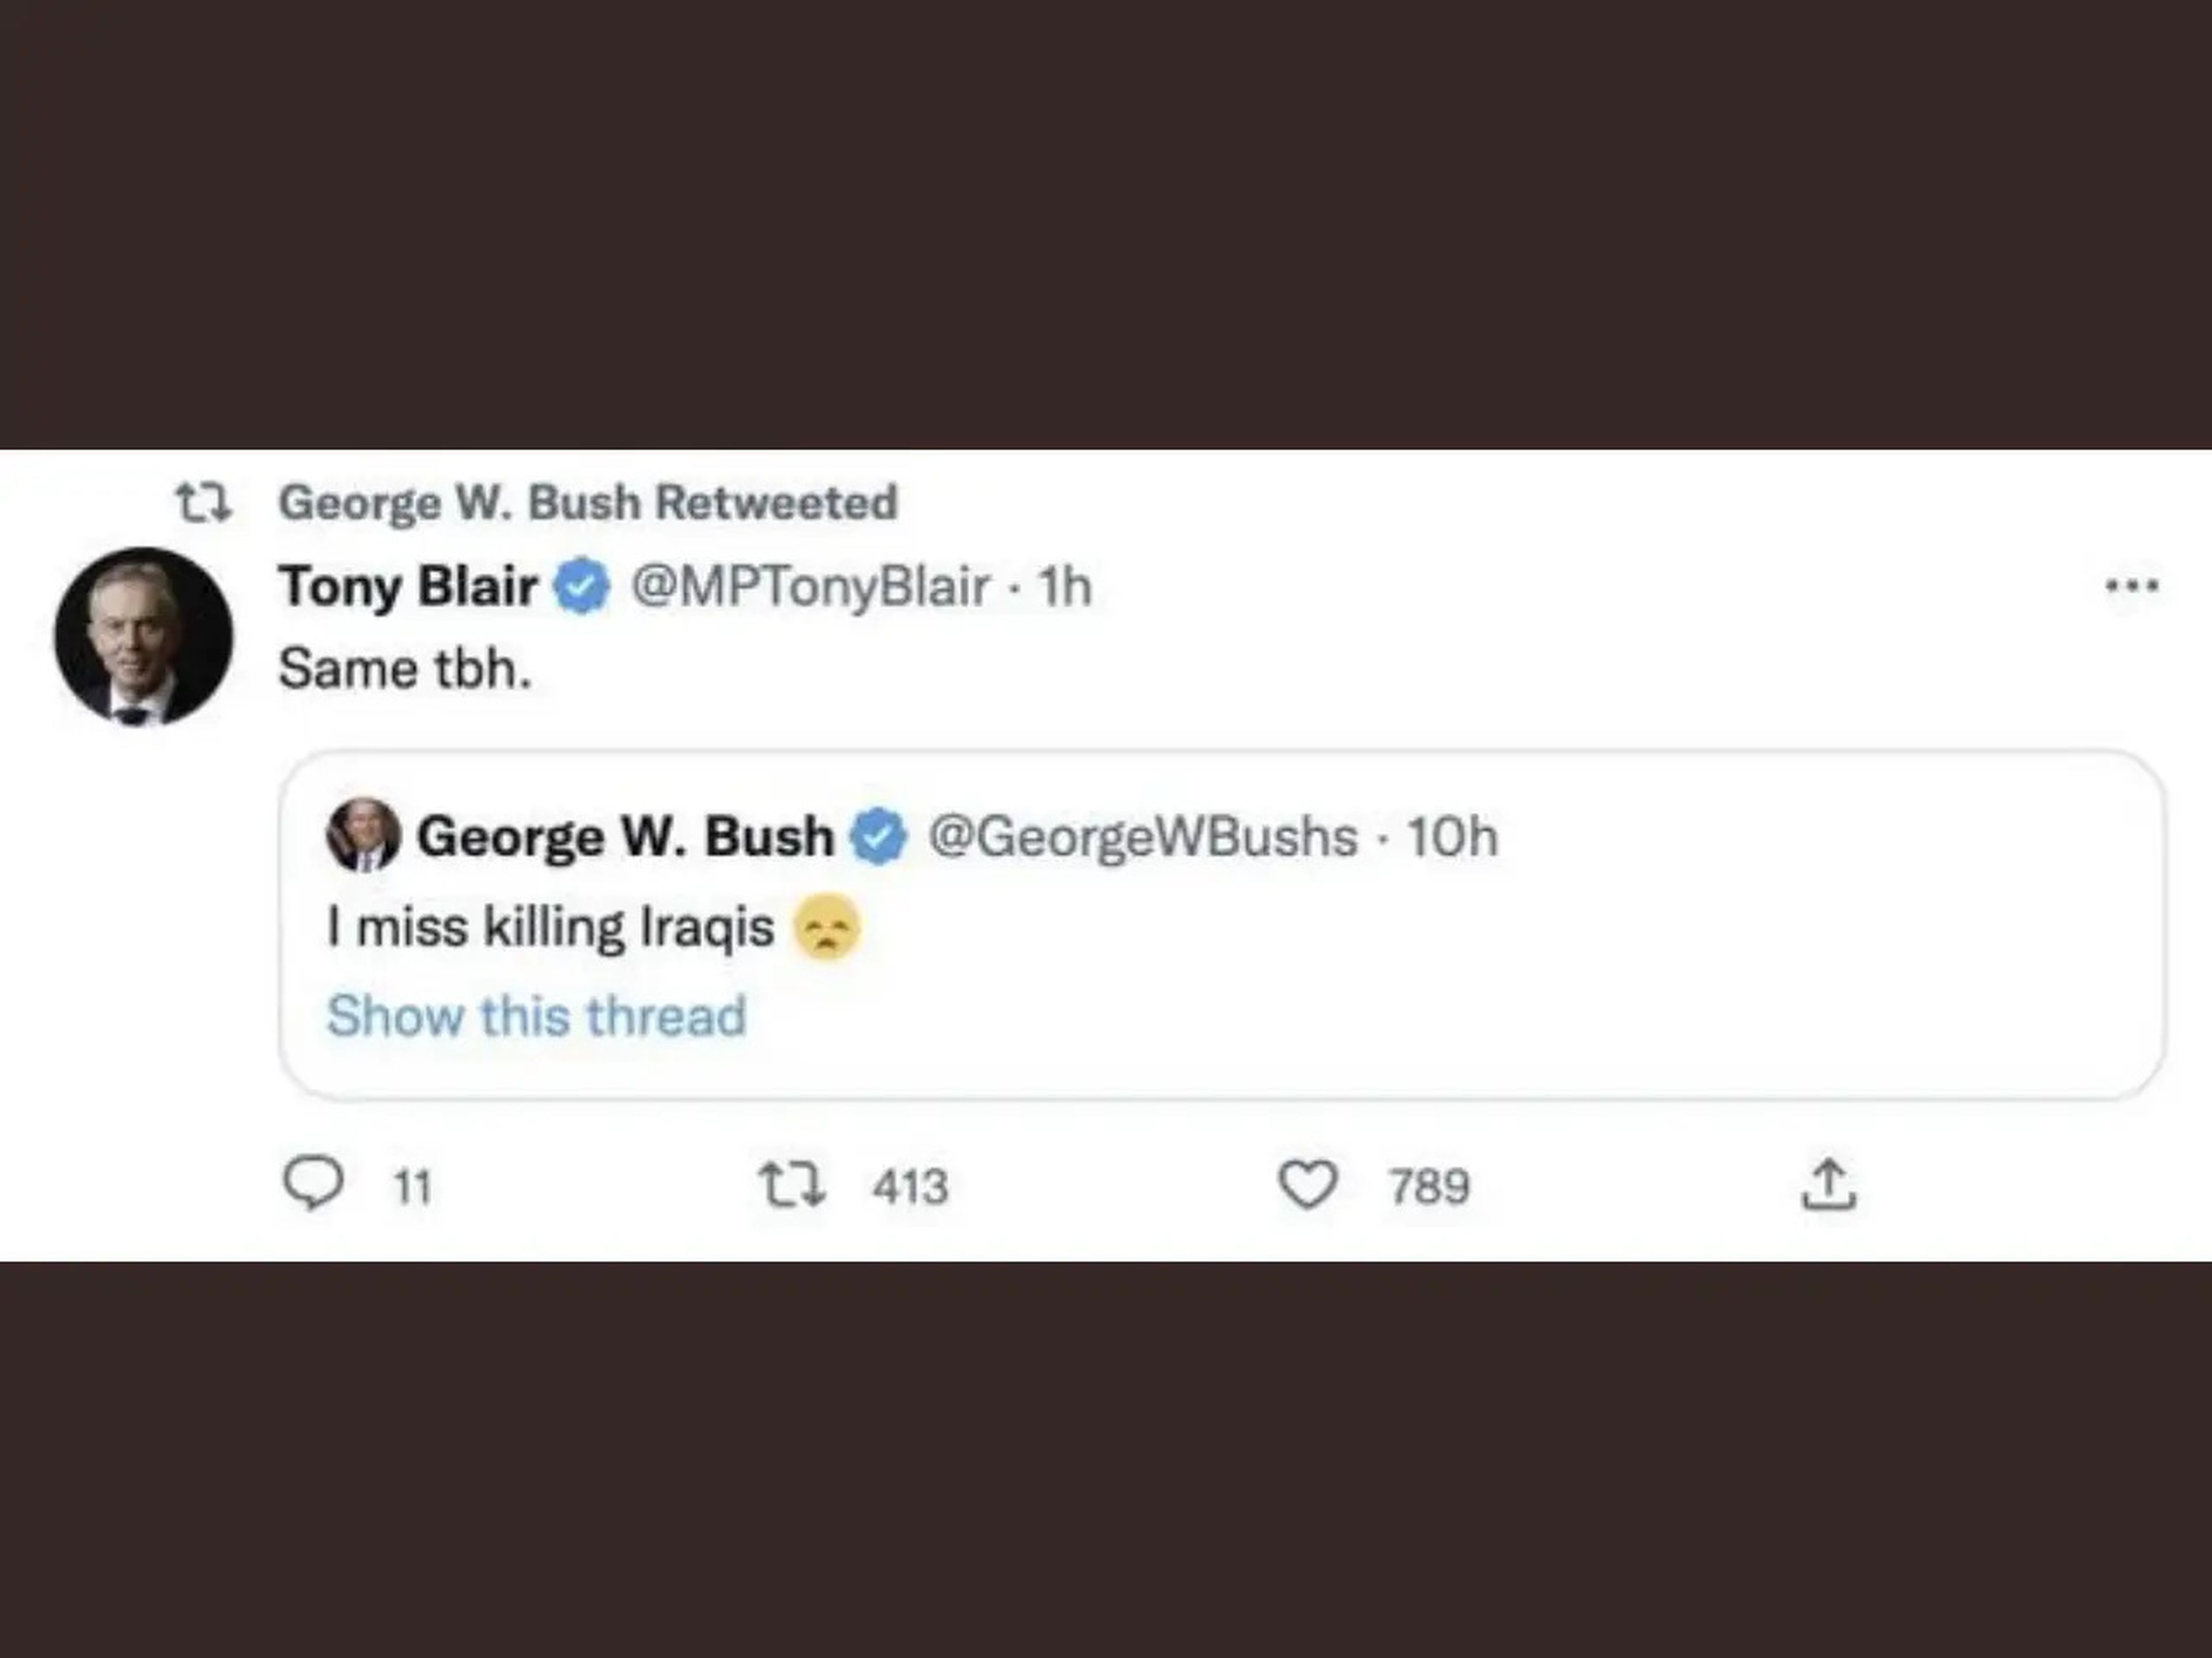 Tweets from Tony Blair and George Bush impersonators